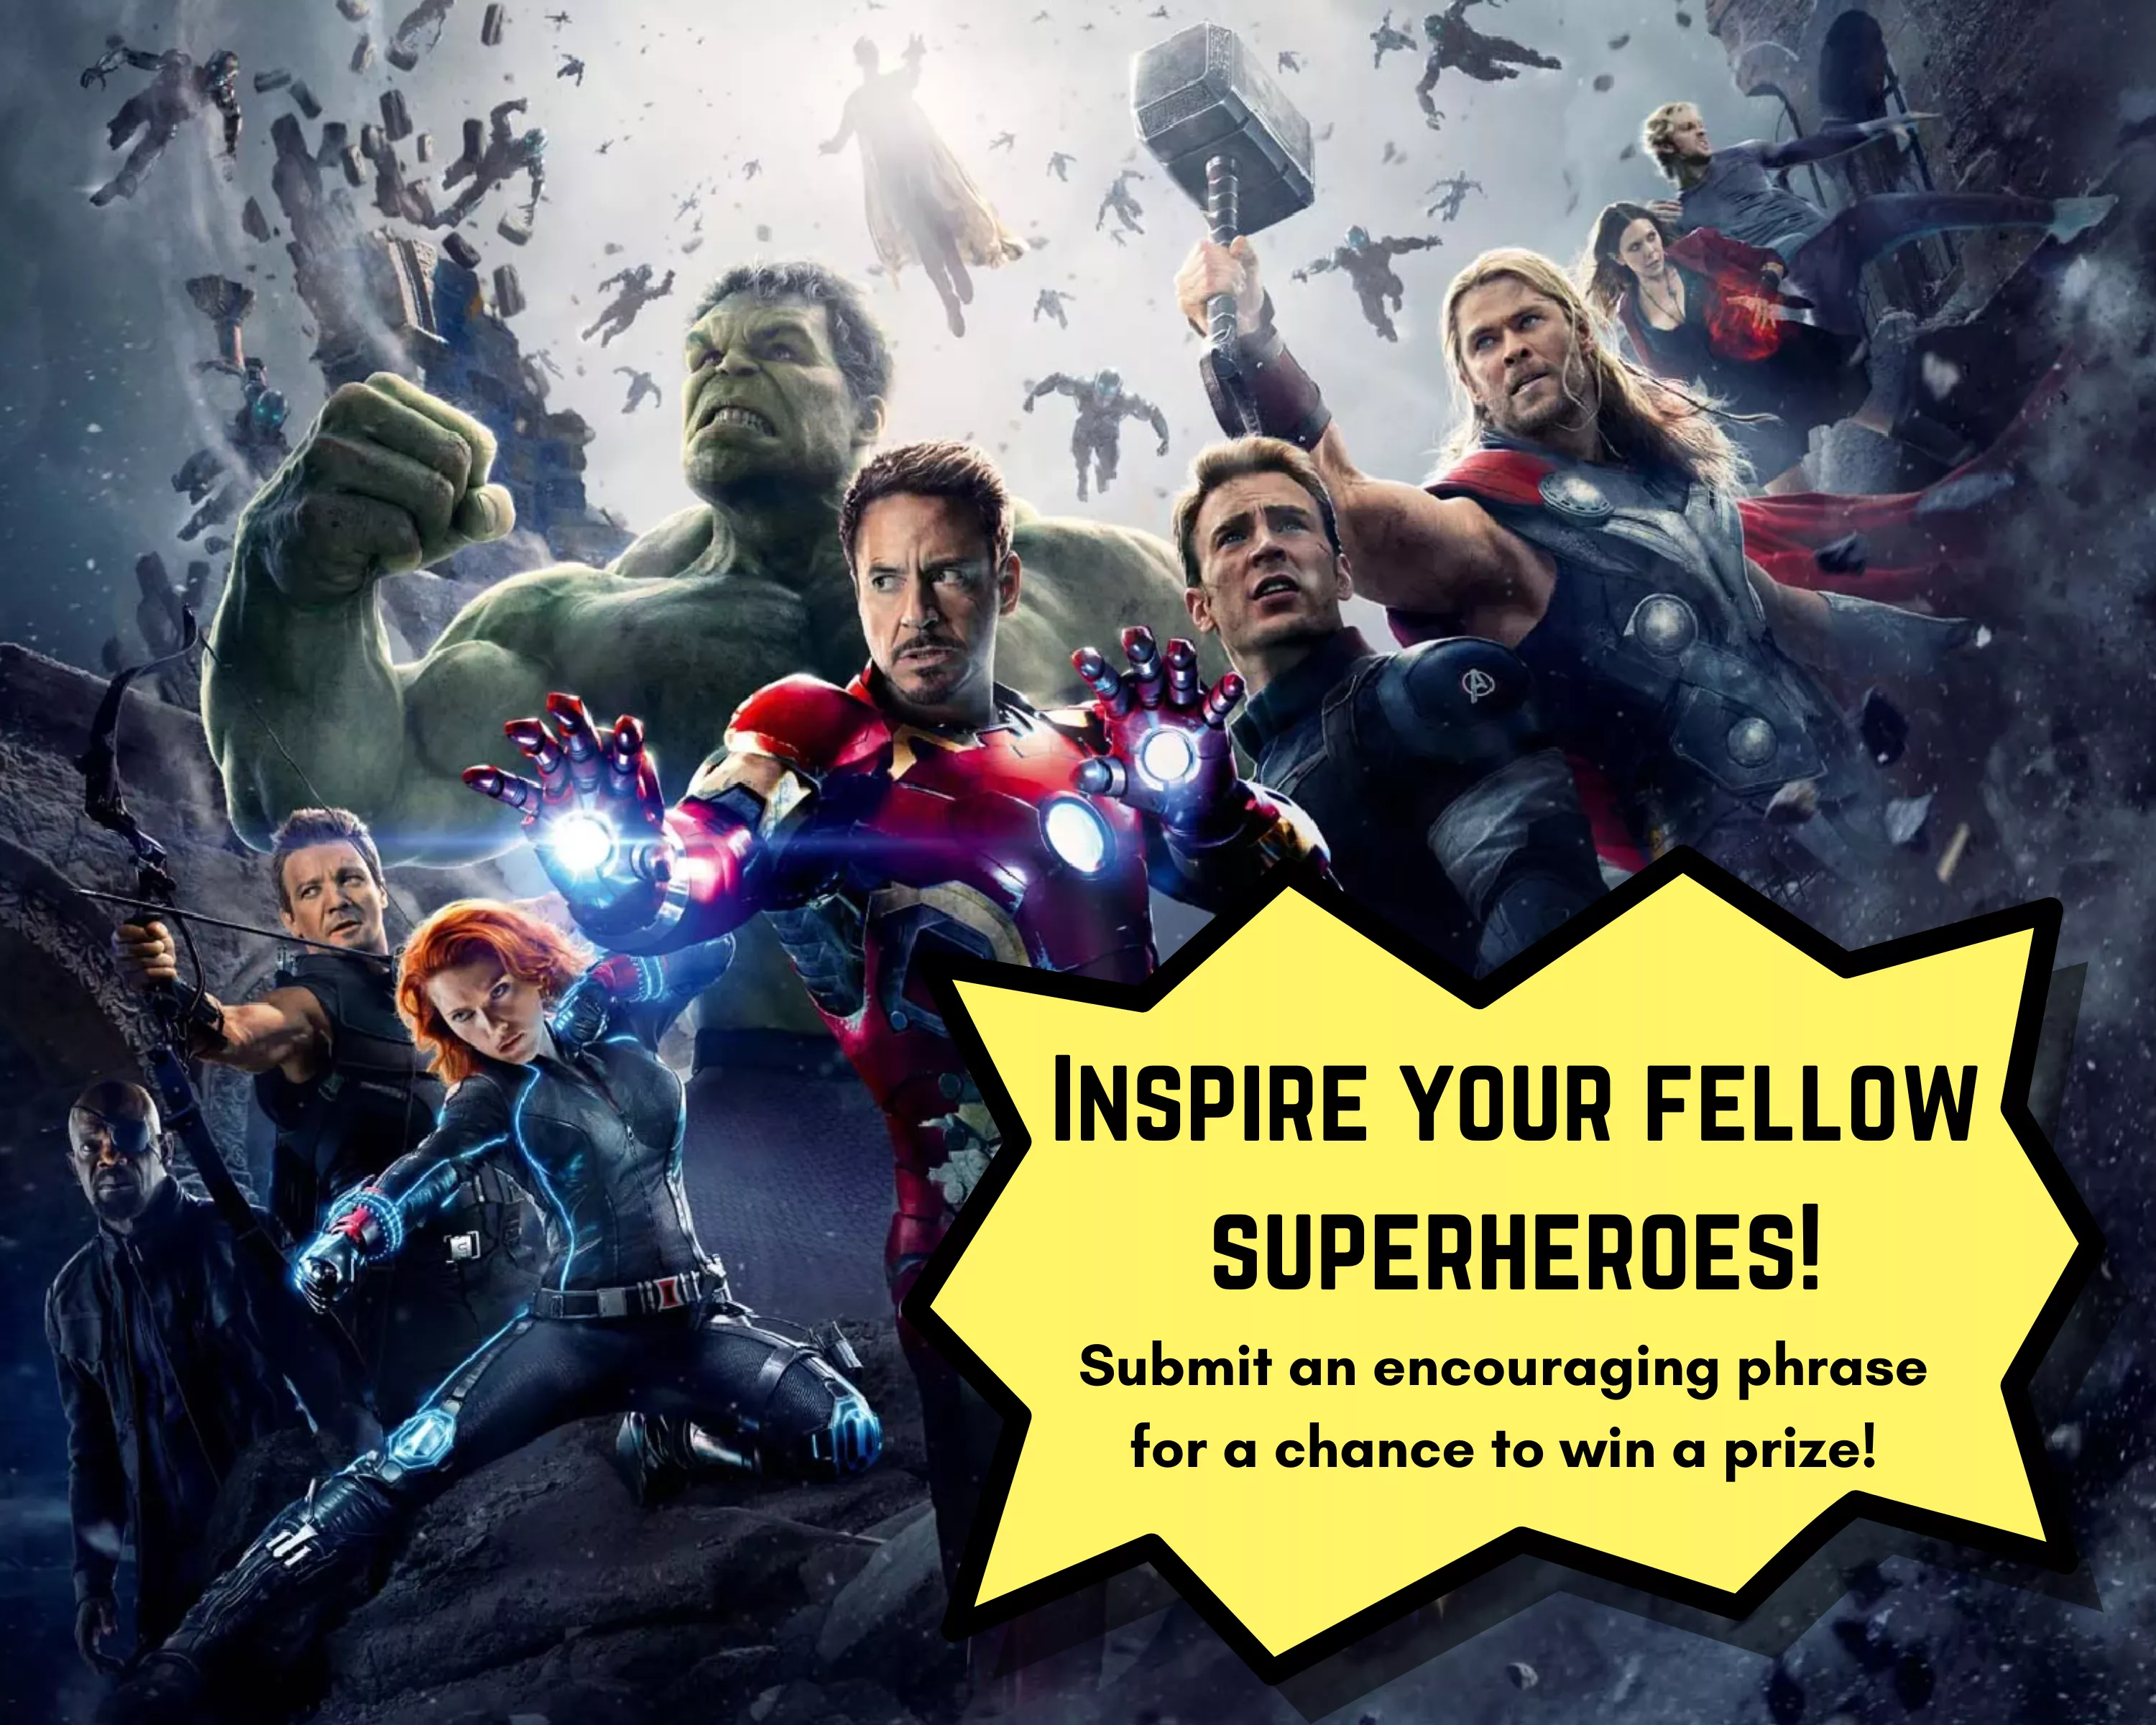 Inspire your fellow superheroes! Submit an encouraging phrase for a chance to win a prize